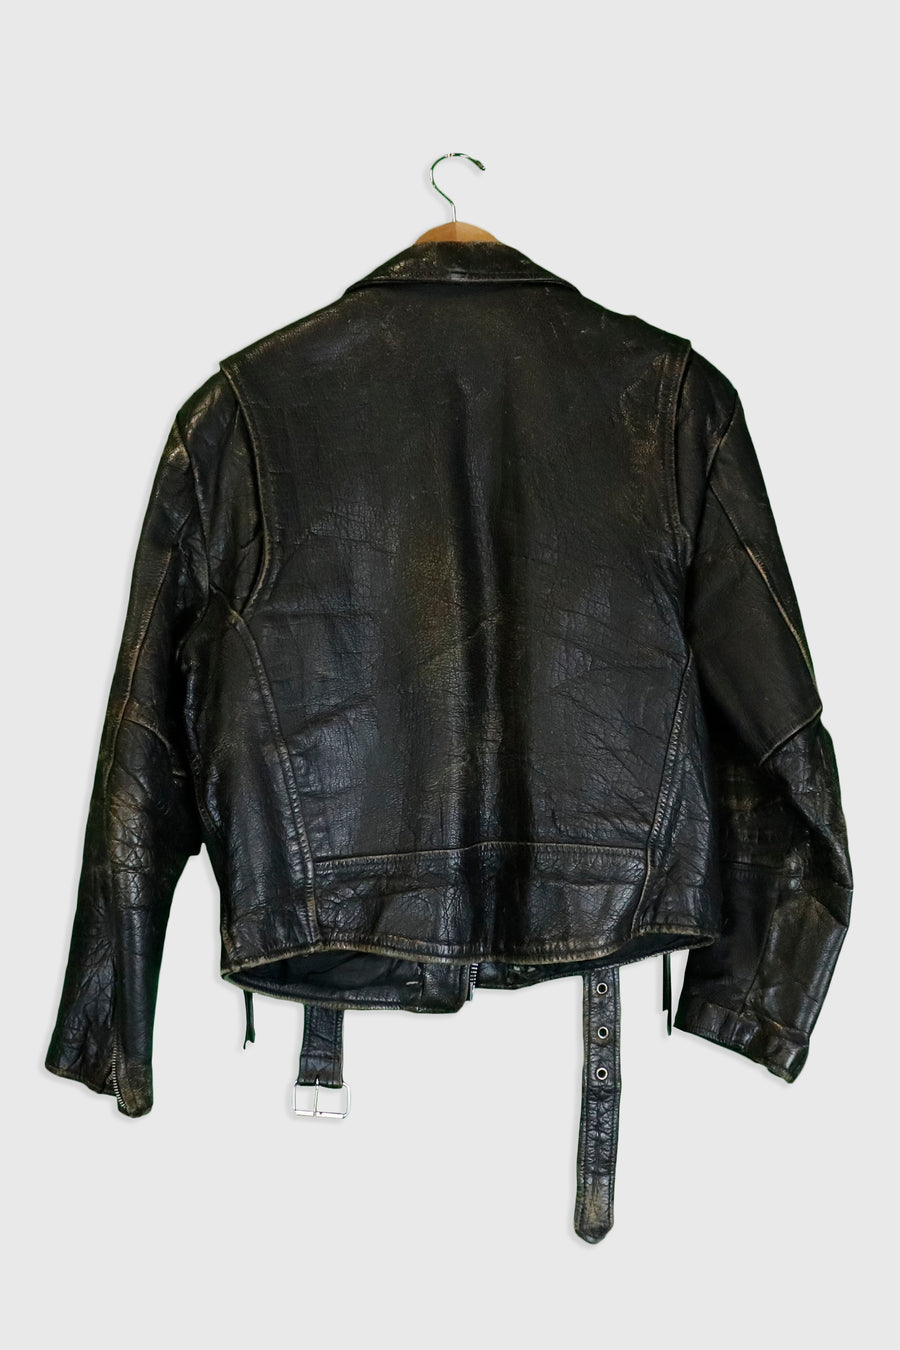 Vintage Thinsulate Wilson Leather Motorcycle Jacket Sz M